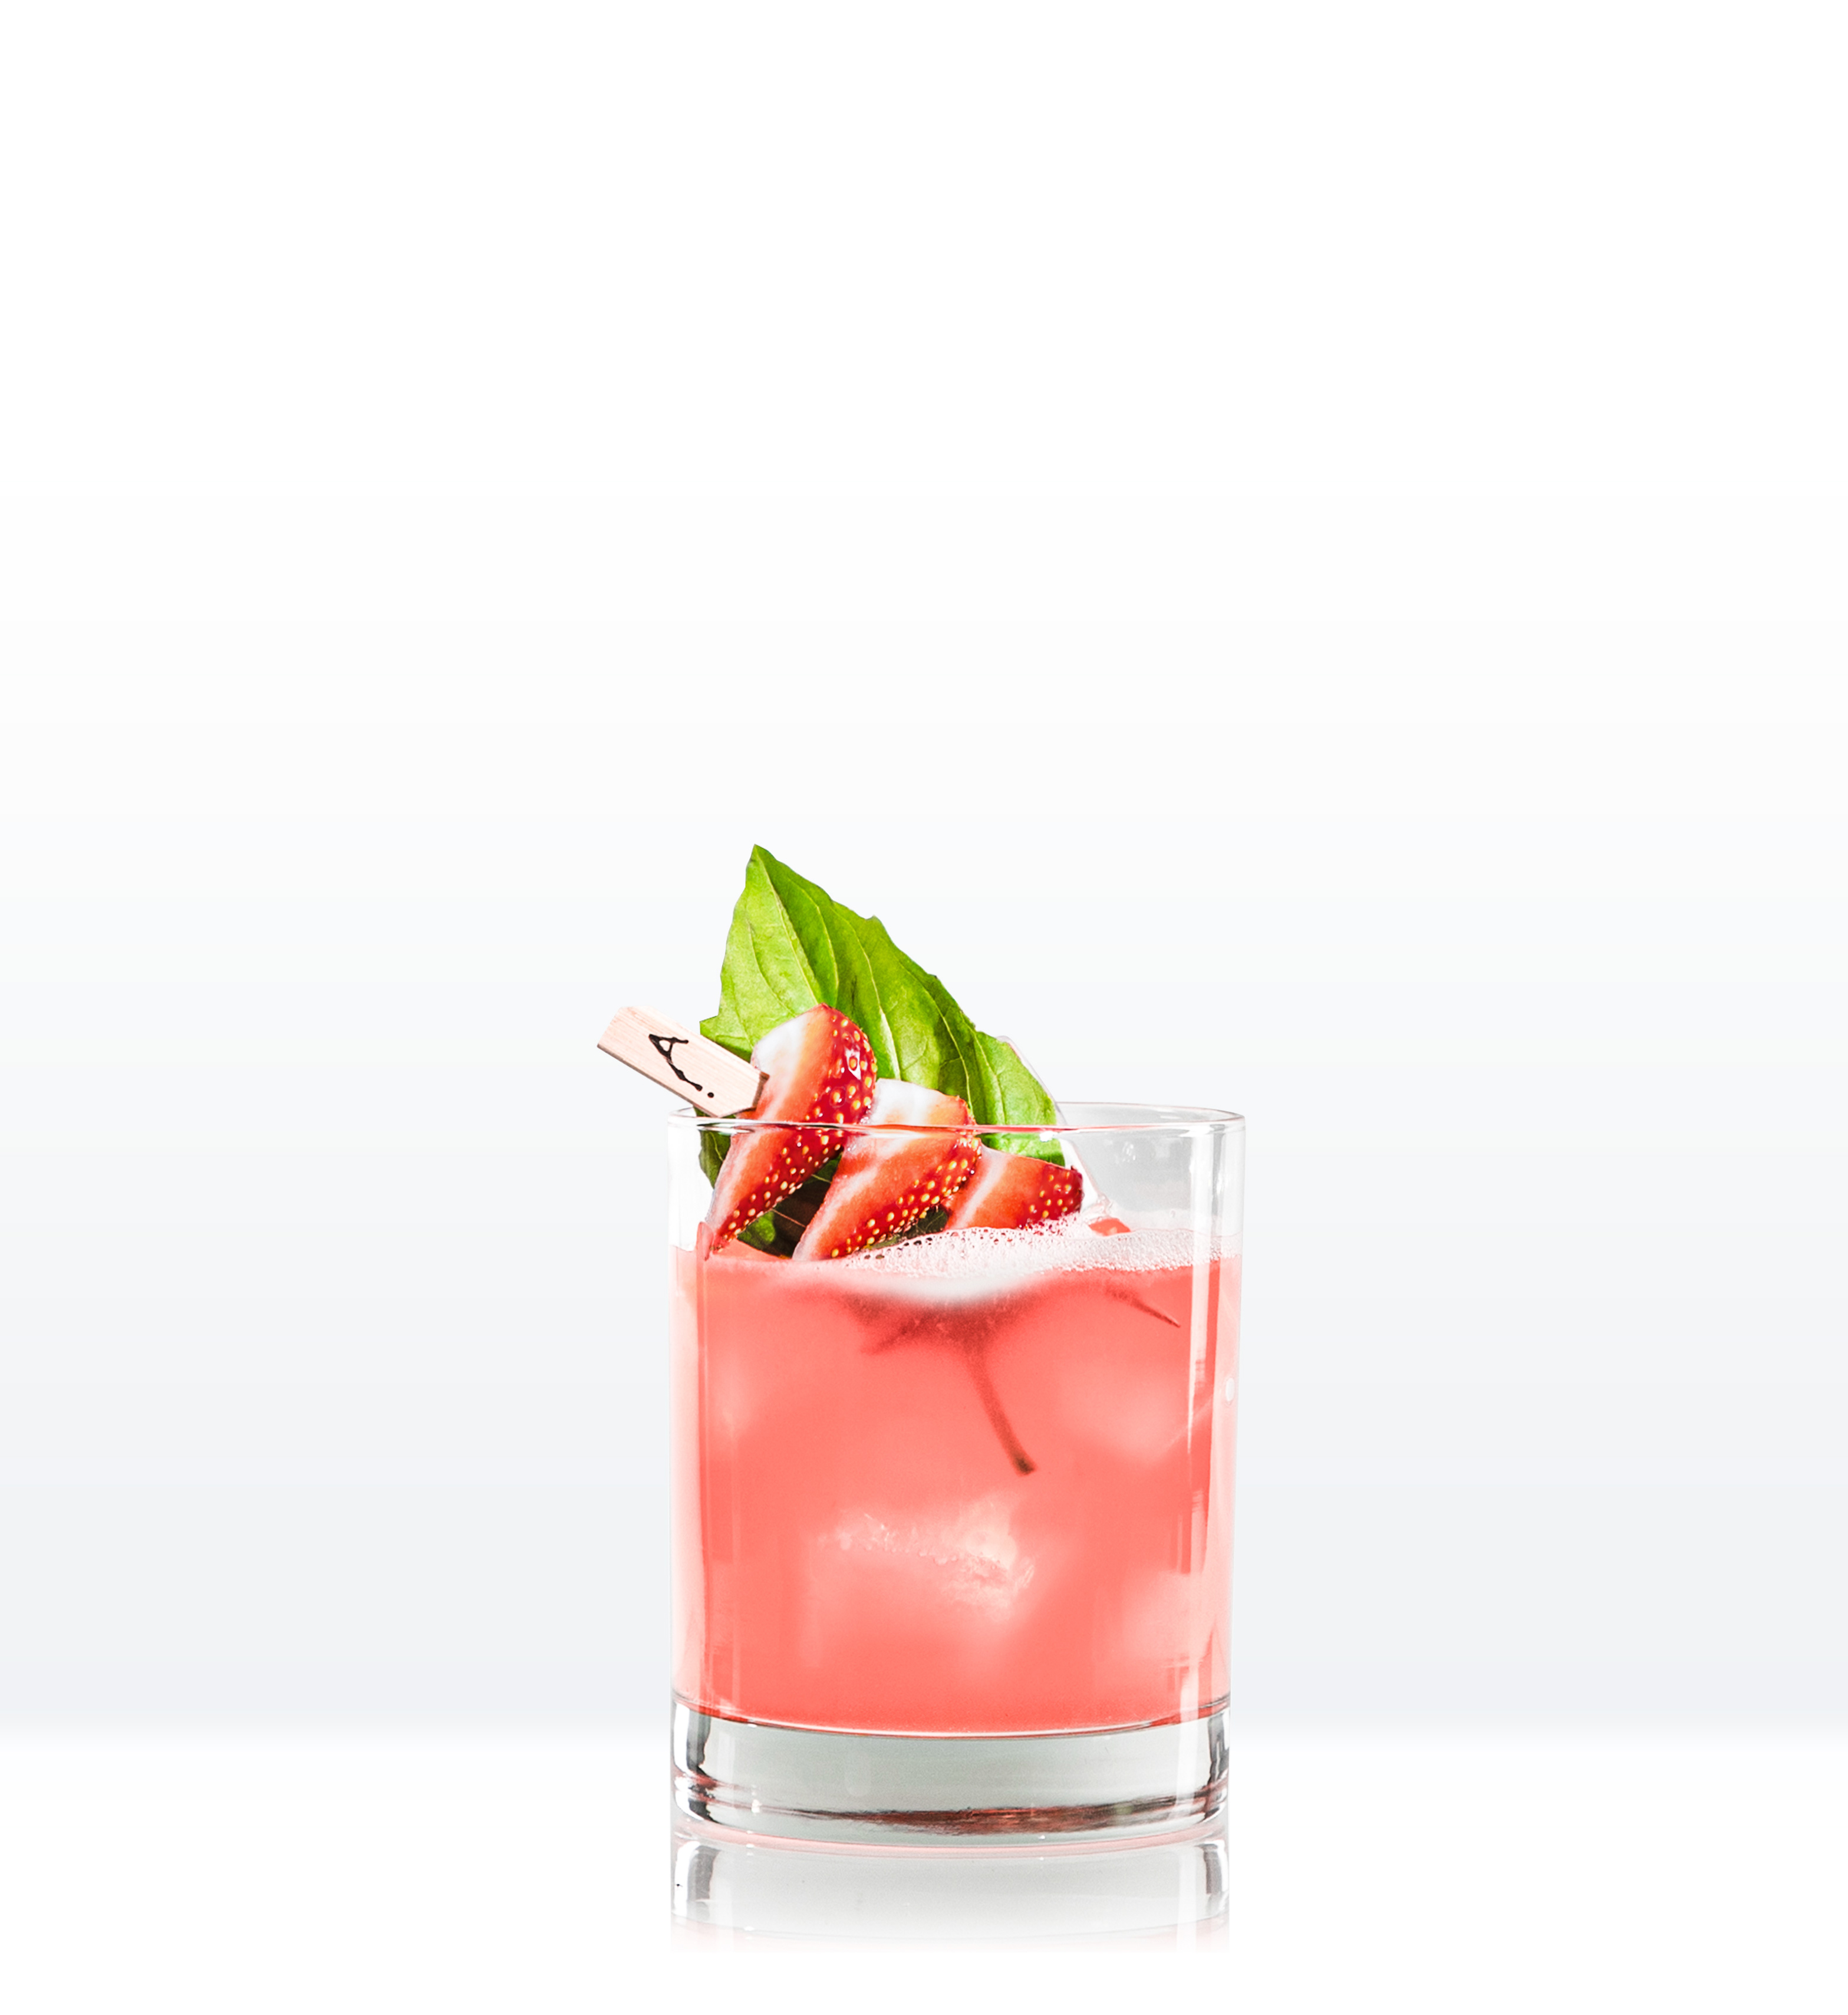 Red cocktail in lowball glass garnished with strawberries on skewer and basil leaf